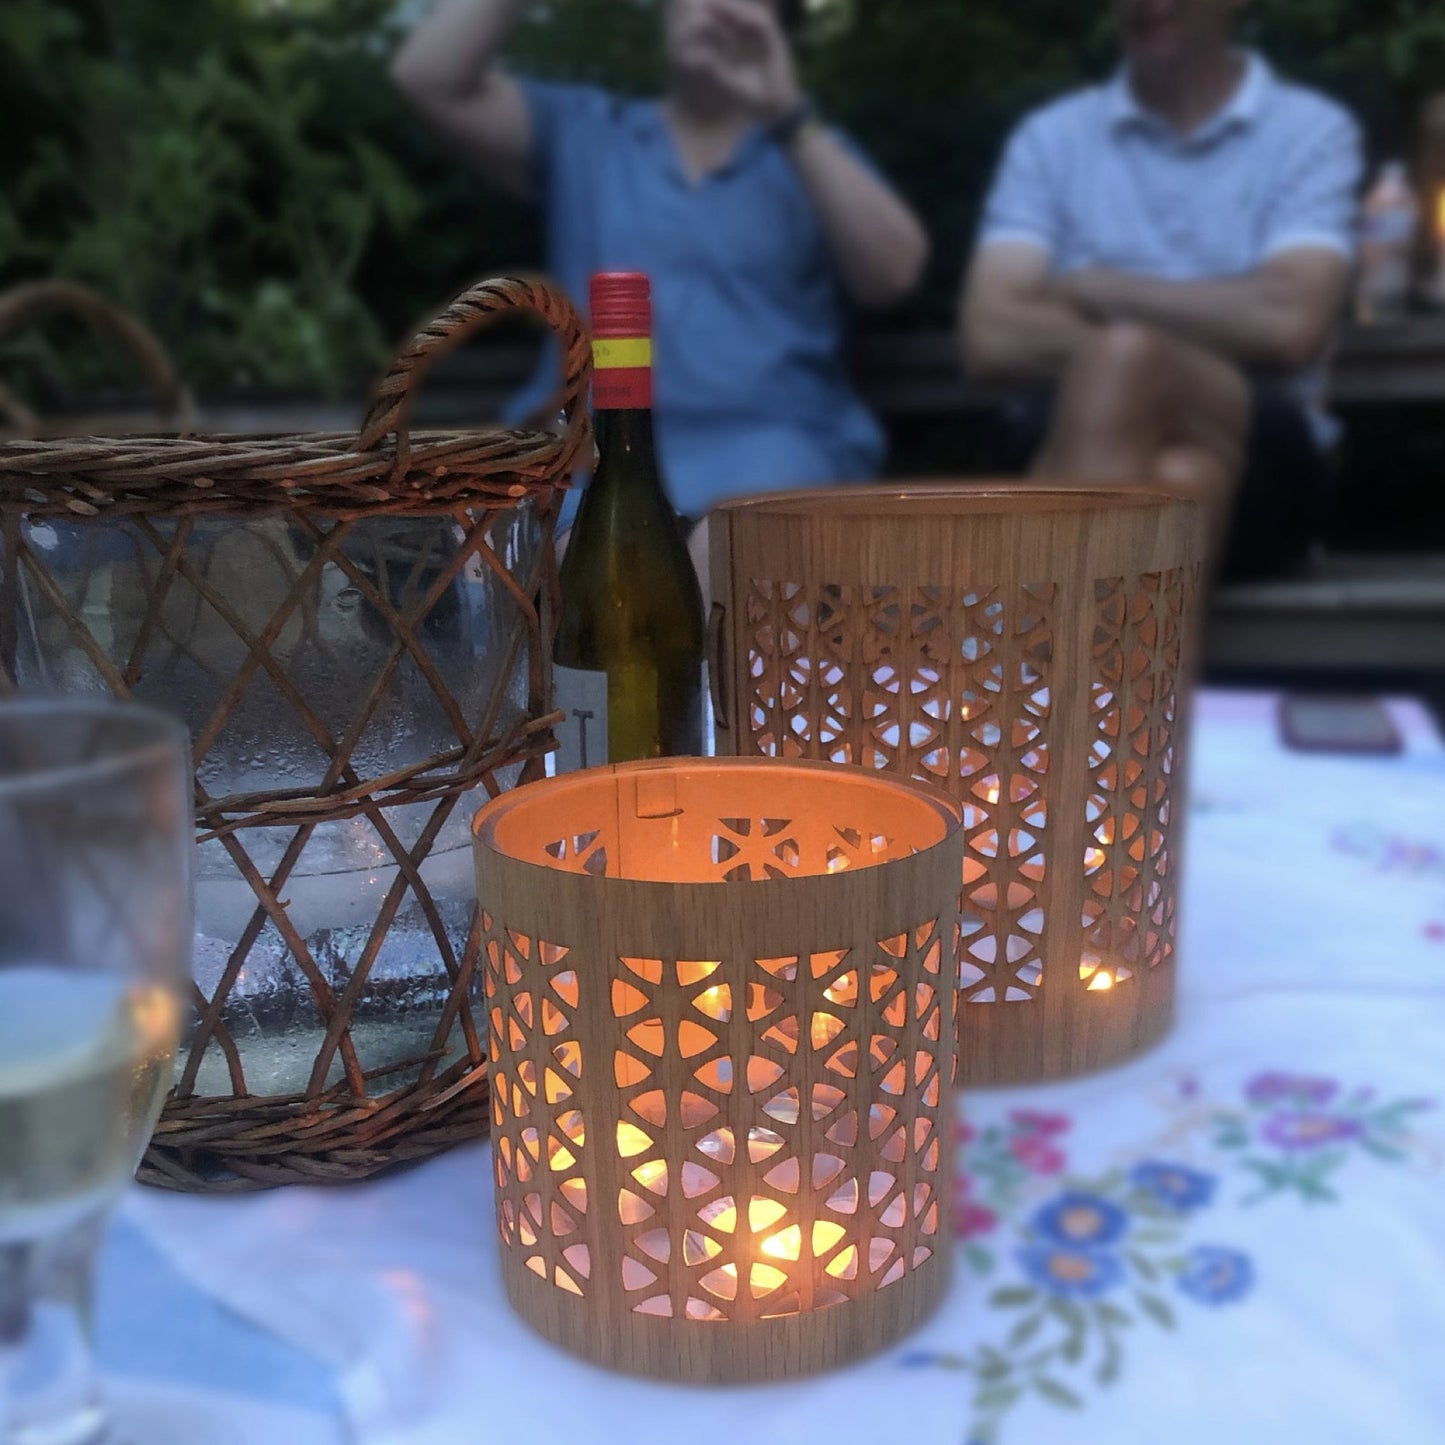 A medium and a large white oak mid-century modern lantern on a summer's eve